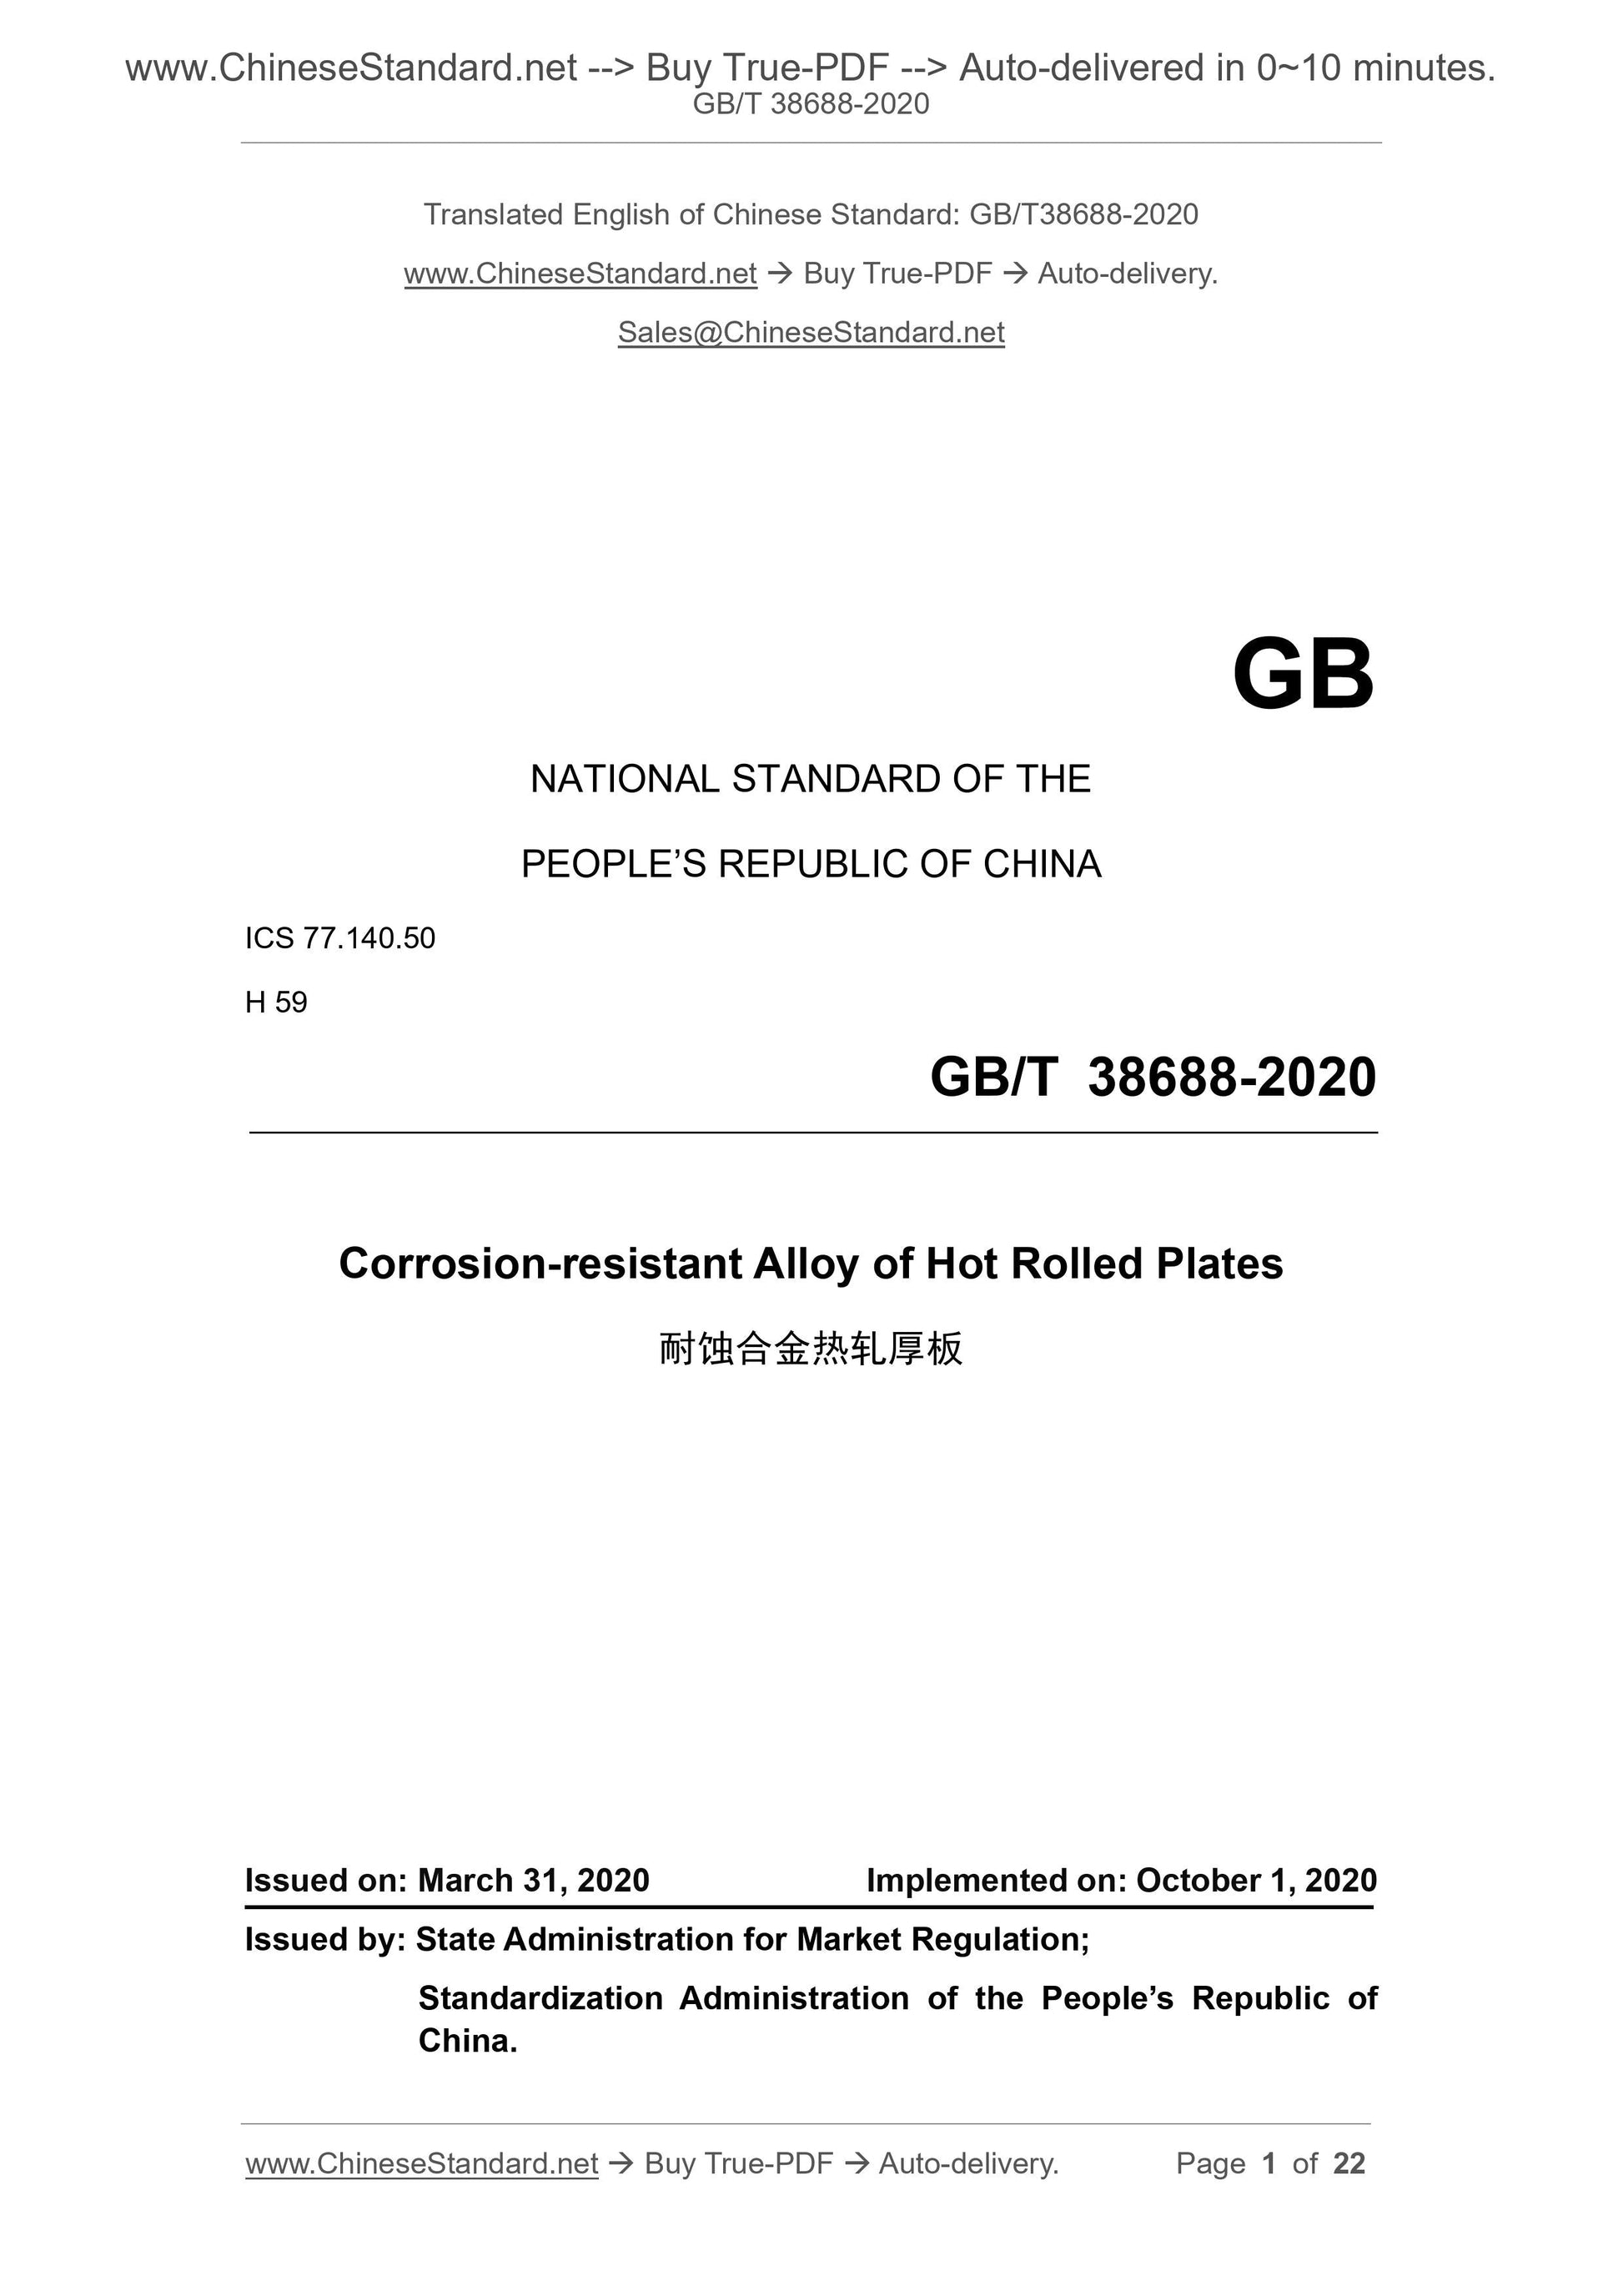 GB/T 38688-2020 Page 1